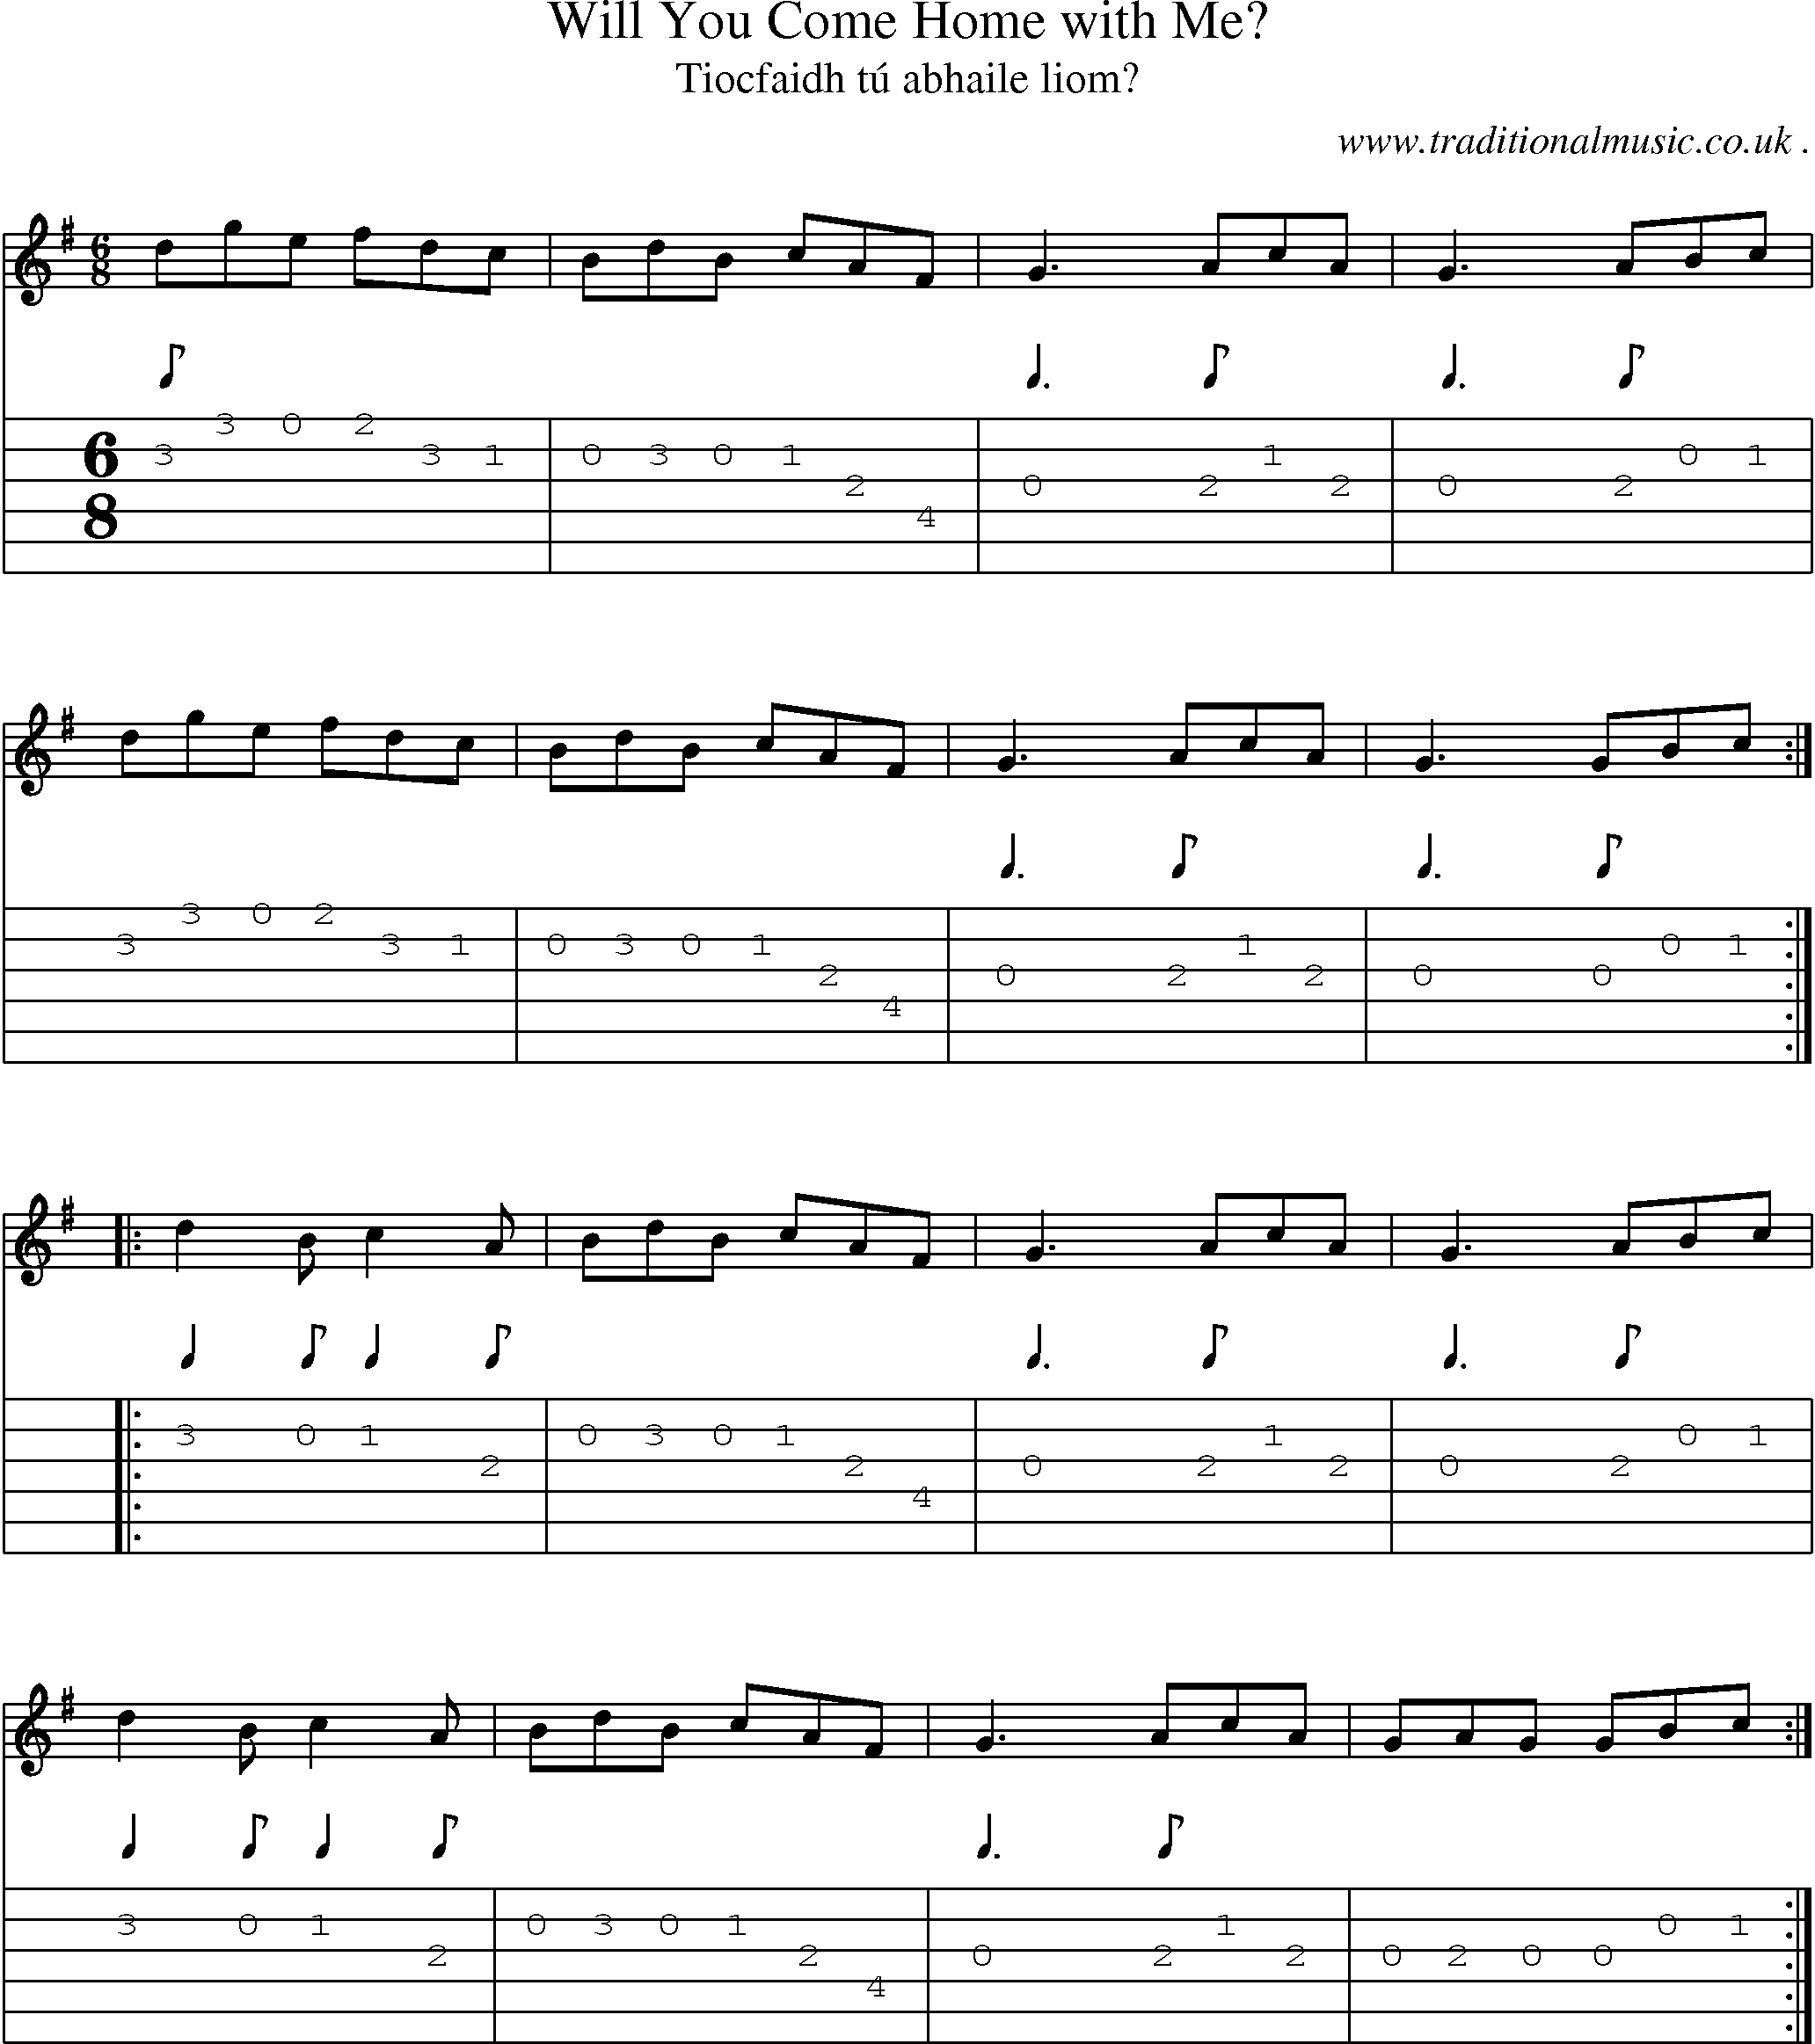 Sheet-Music and Guitar Tabs for Will You Come Home With Me